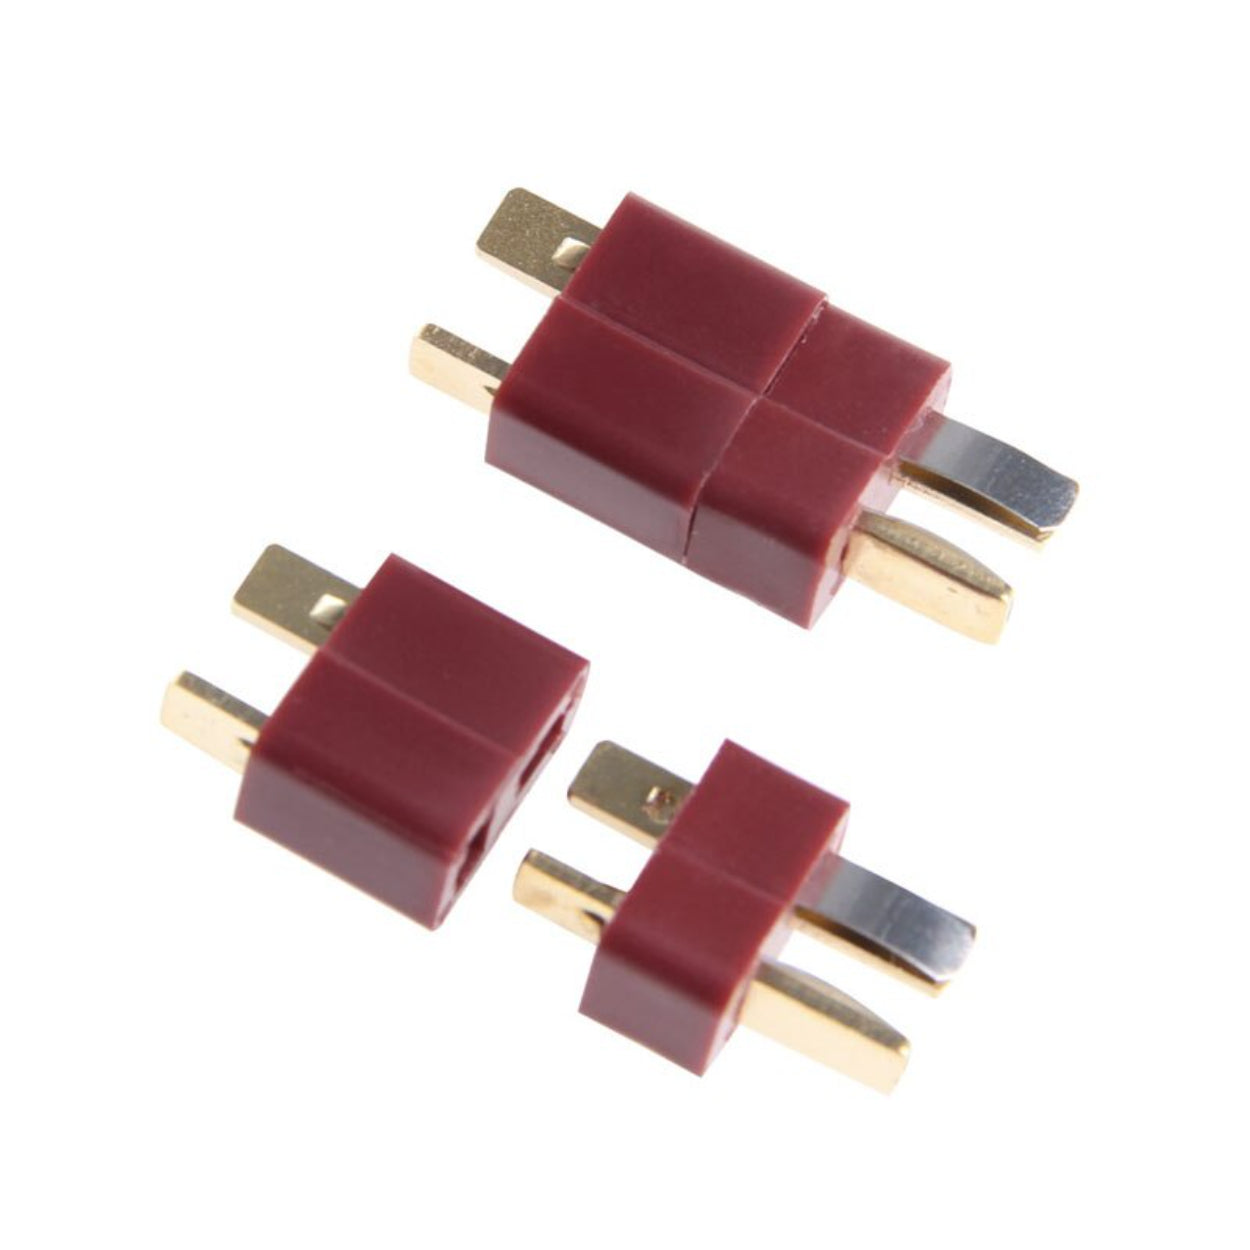 t-plug-deans-connector-for-lipo-battery-male-and-female-2-pair.jpg